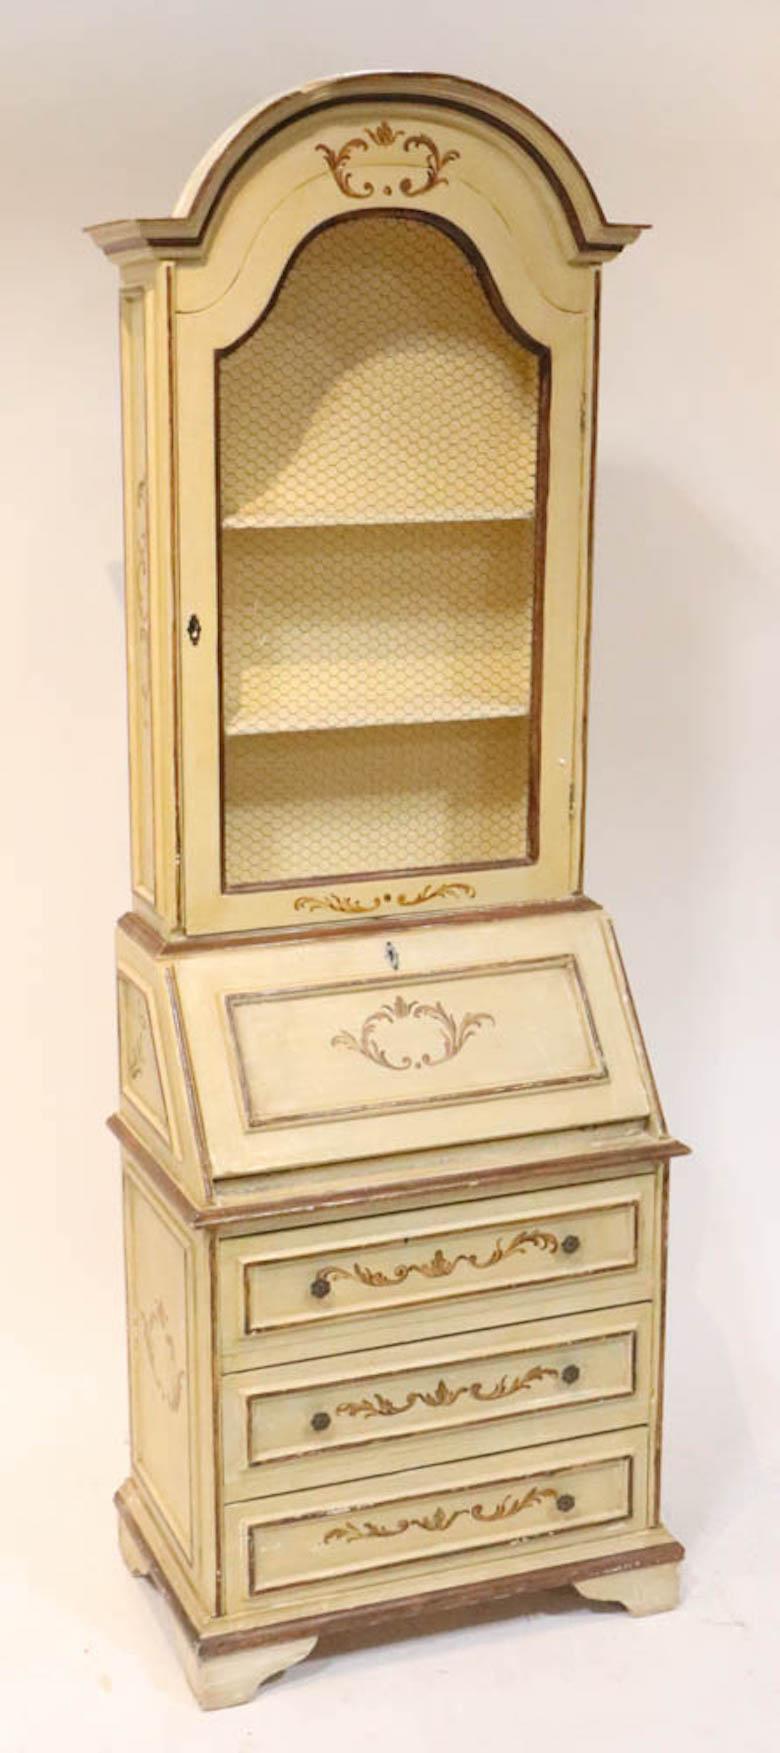 Embrace the timeless charm of this Classic Venetian Style Italian Polychrome Lacquered Hand-Painted two parts Bookcase, a piece of furniture that exudes both artistry and history. The exquisite hand-painted Venetian wreath decoration and parcel gilt